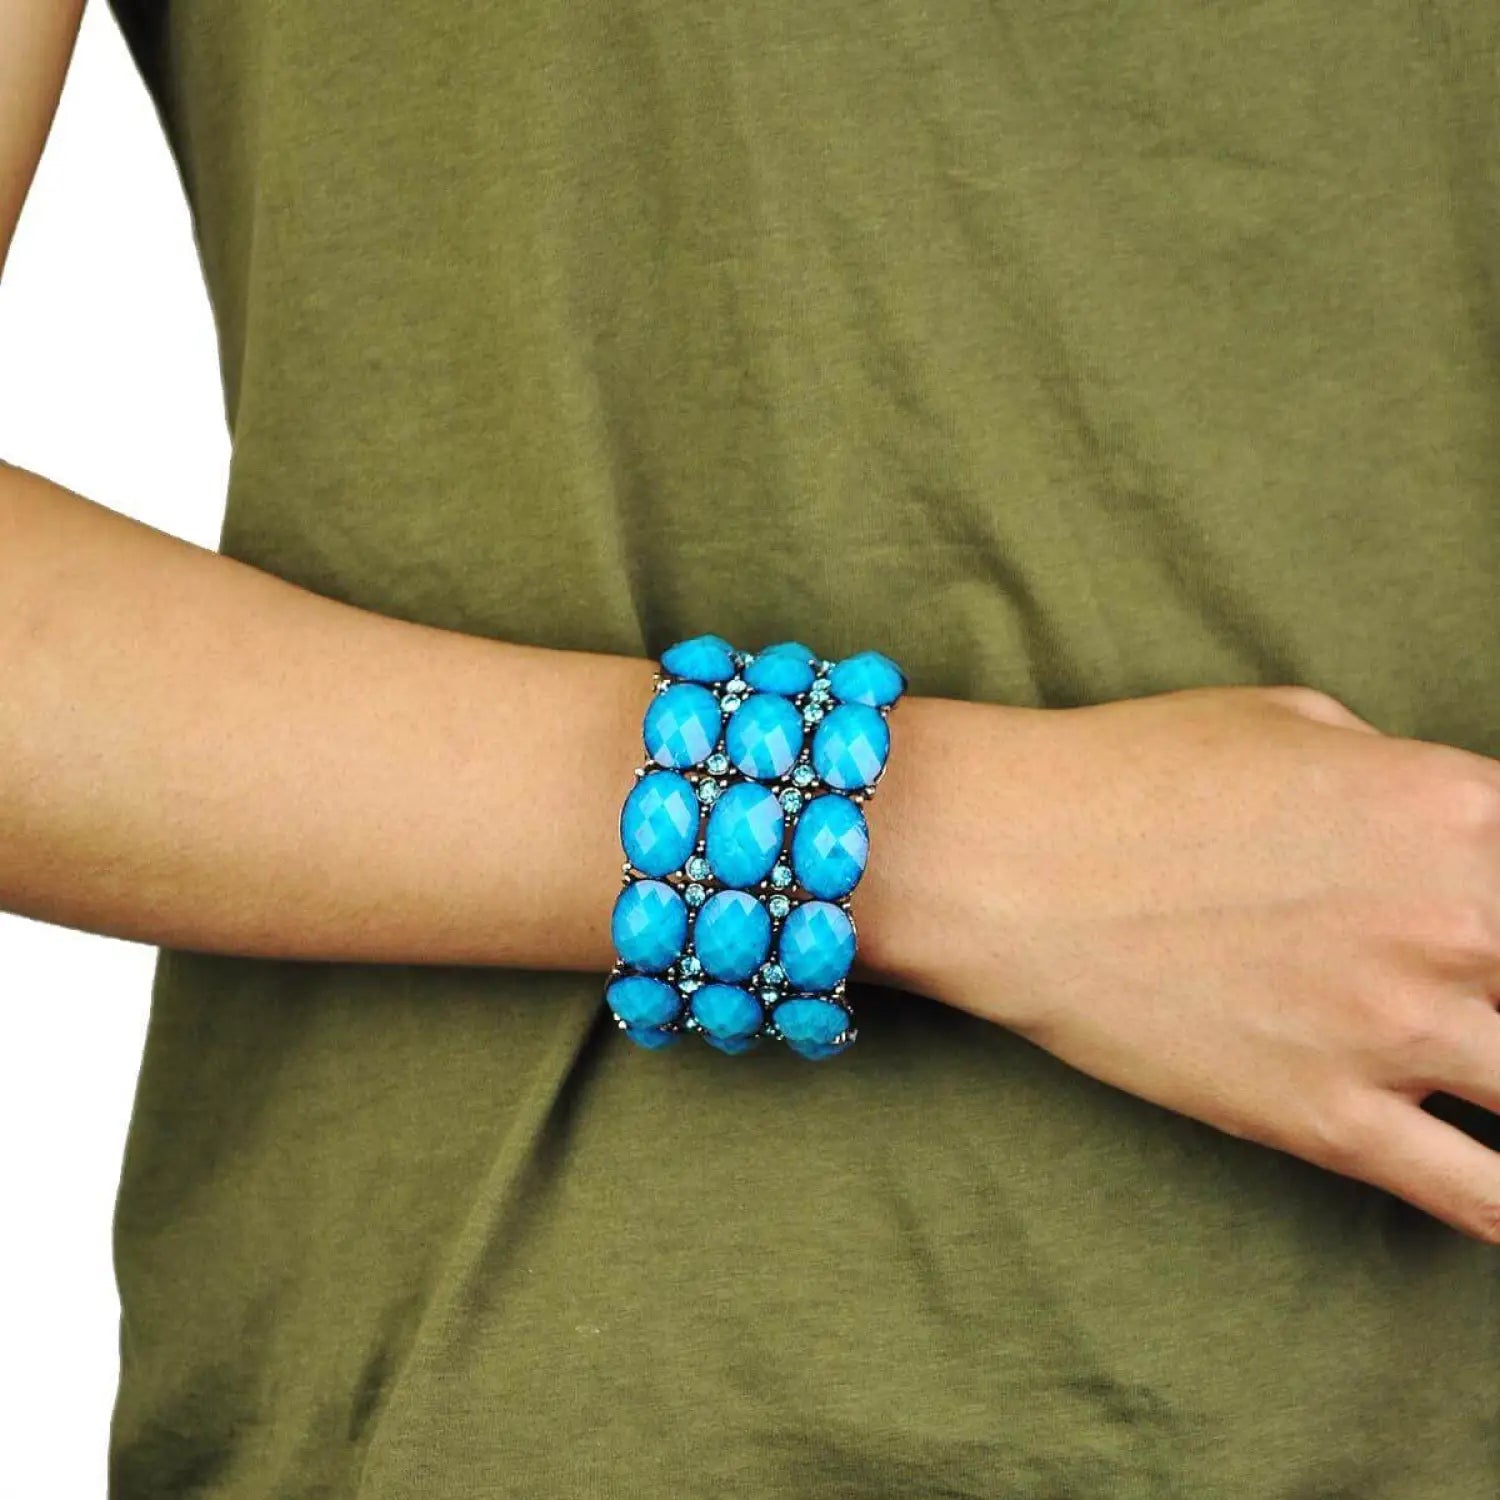 Chunky turquoise bracelet with swish crystals and vivid metal beads